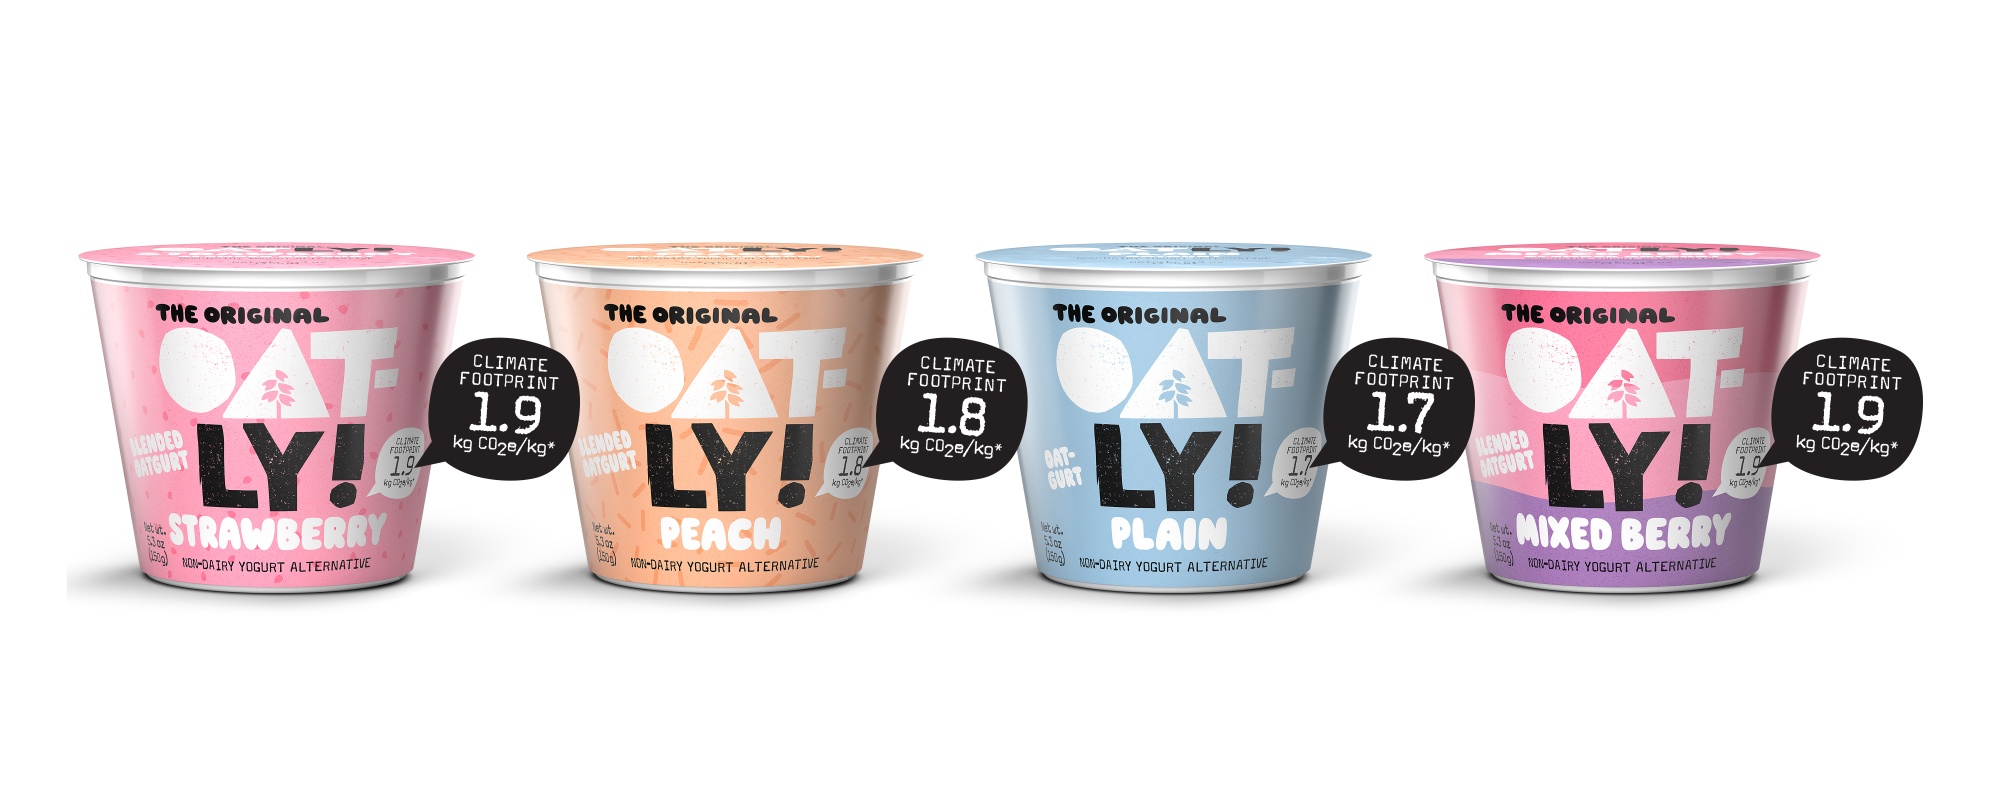 Oatly Launches Climate Footprint Labels in the US - Bloomberg